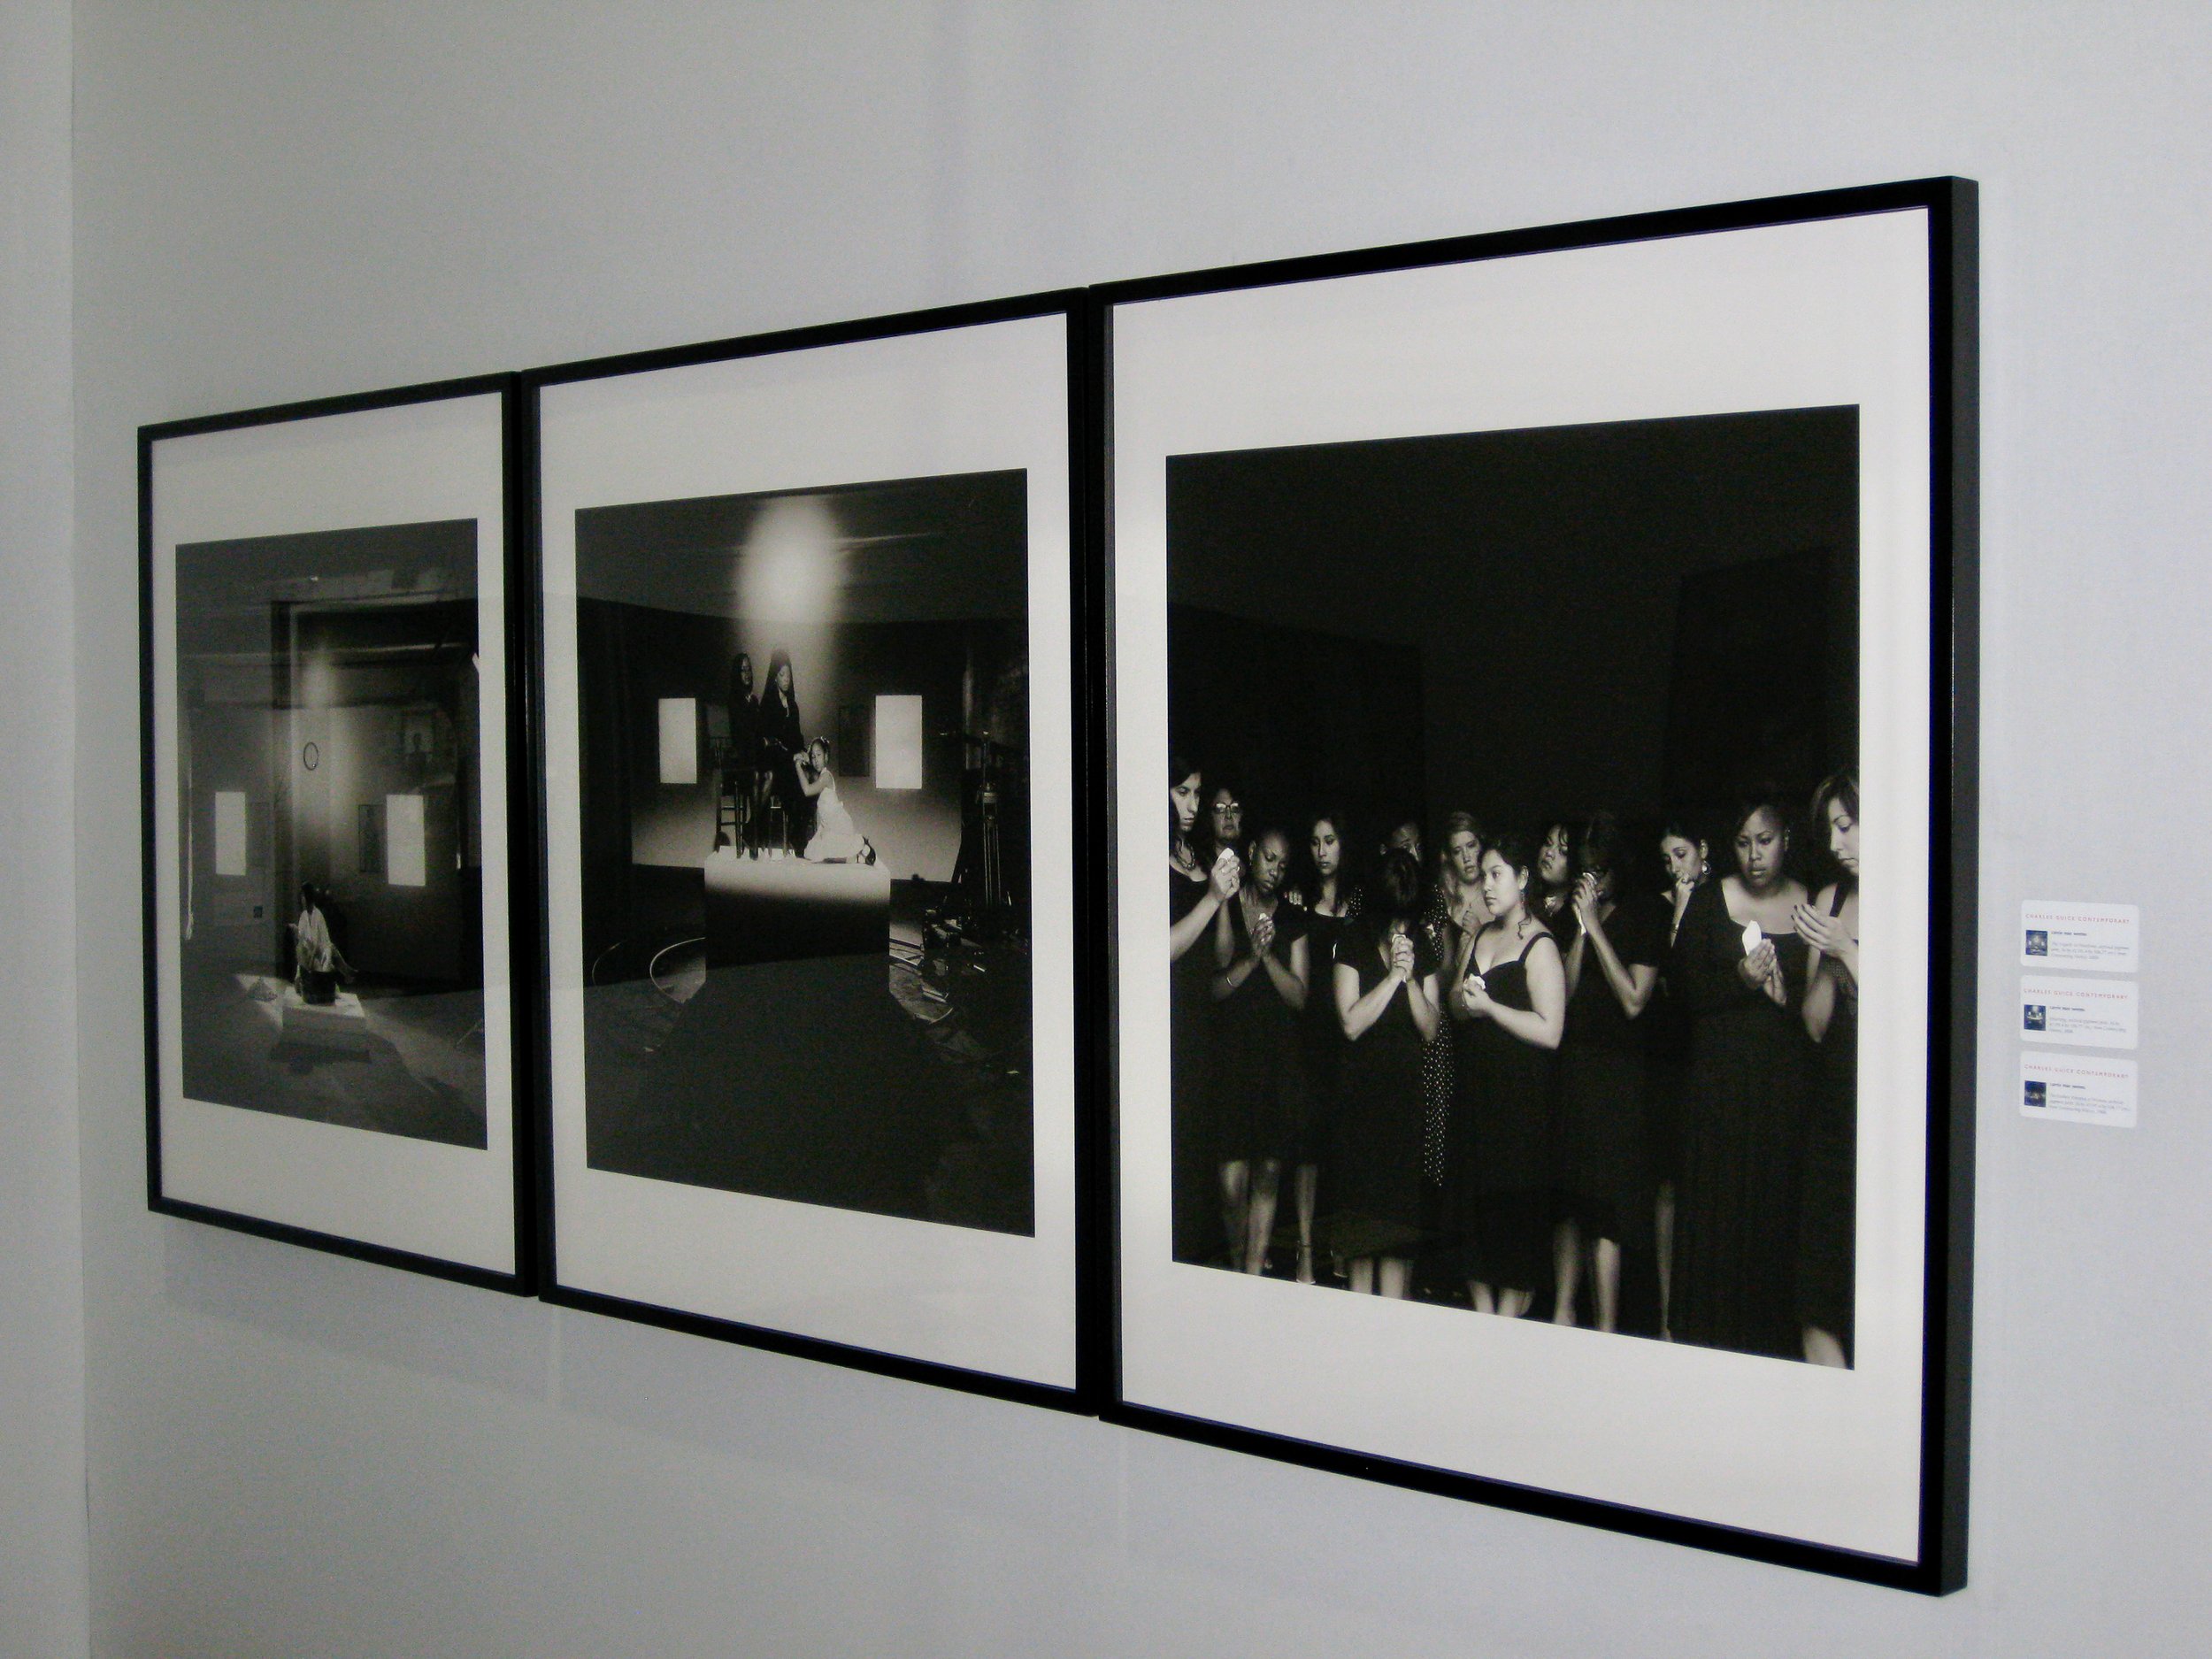  Installation photograph of Carrie Mae Weems’s  Constructing History,  Charles Guice Contemporary’s booth at The AIPAD Photography Show New York, Park Avenue Armory, New York, 2009 